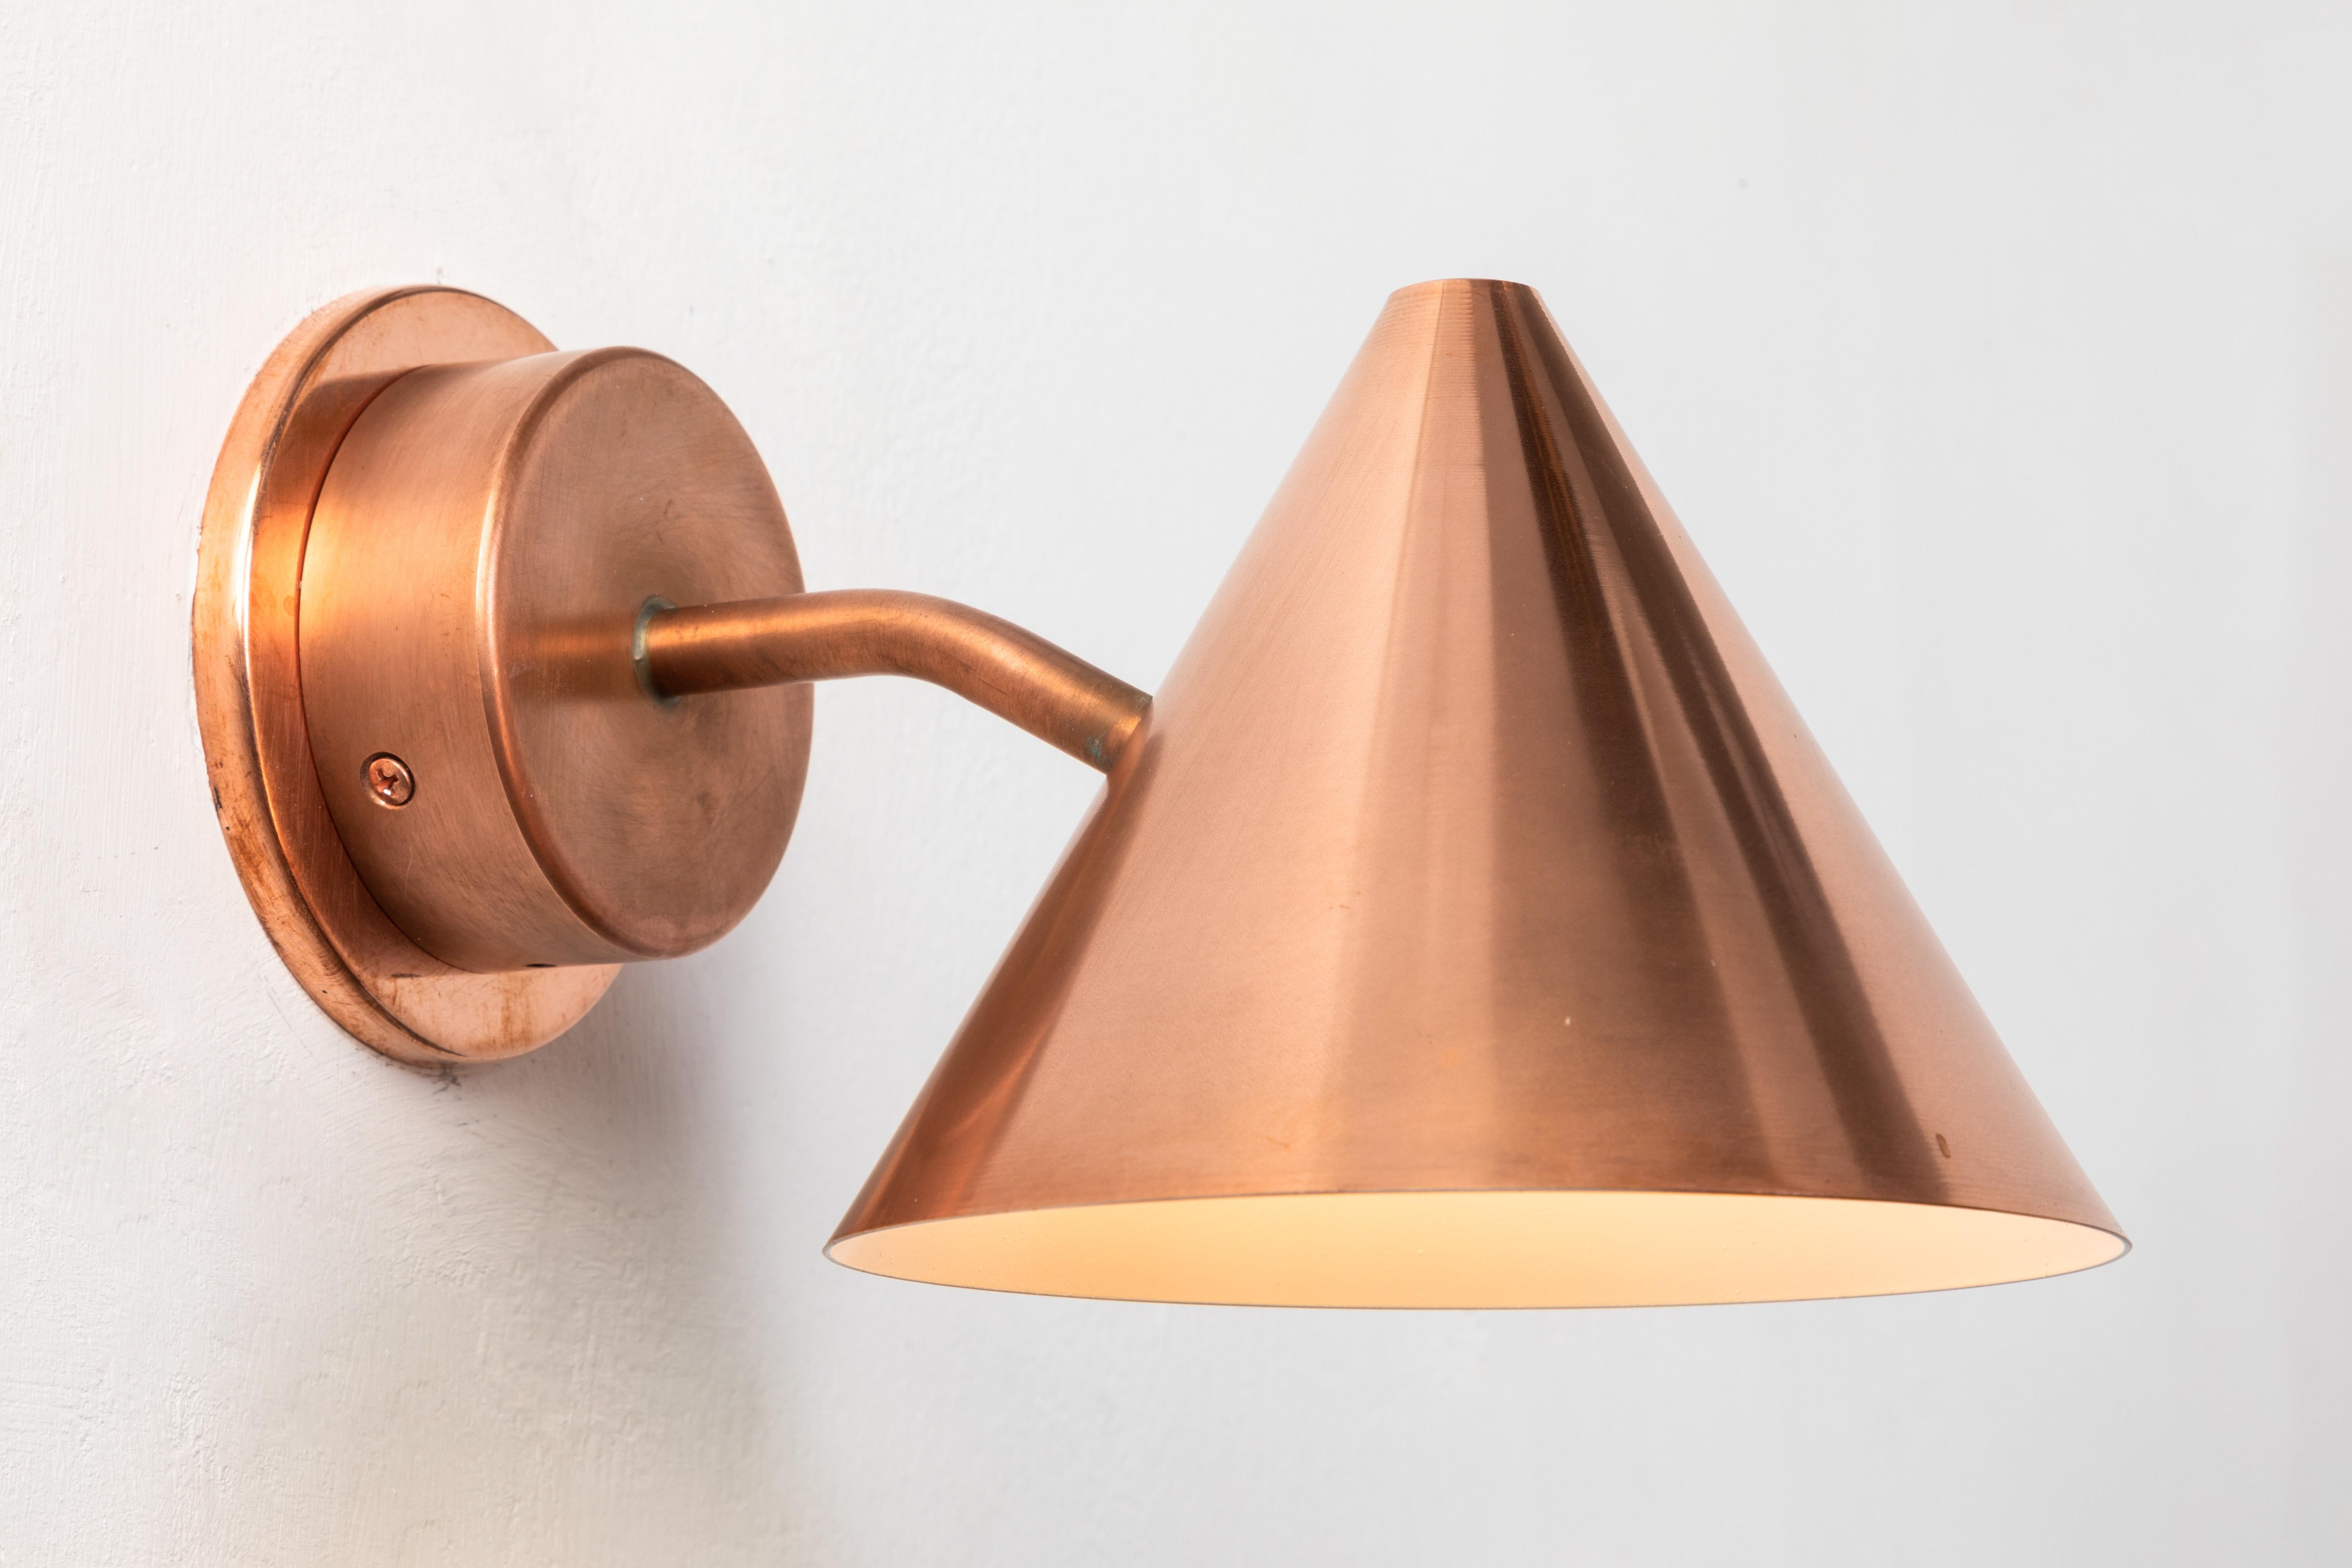 Pair of Hans-Agne Jakobsson 'Mini-Tratten' raw copper outdoor sconces. An exclusive made for U.S. and UL listed authorized re-edition of the classic Swedish design executed in raw copper with white painted interior. An incredibly refined design that